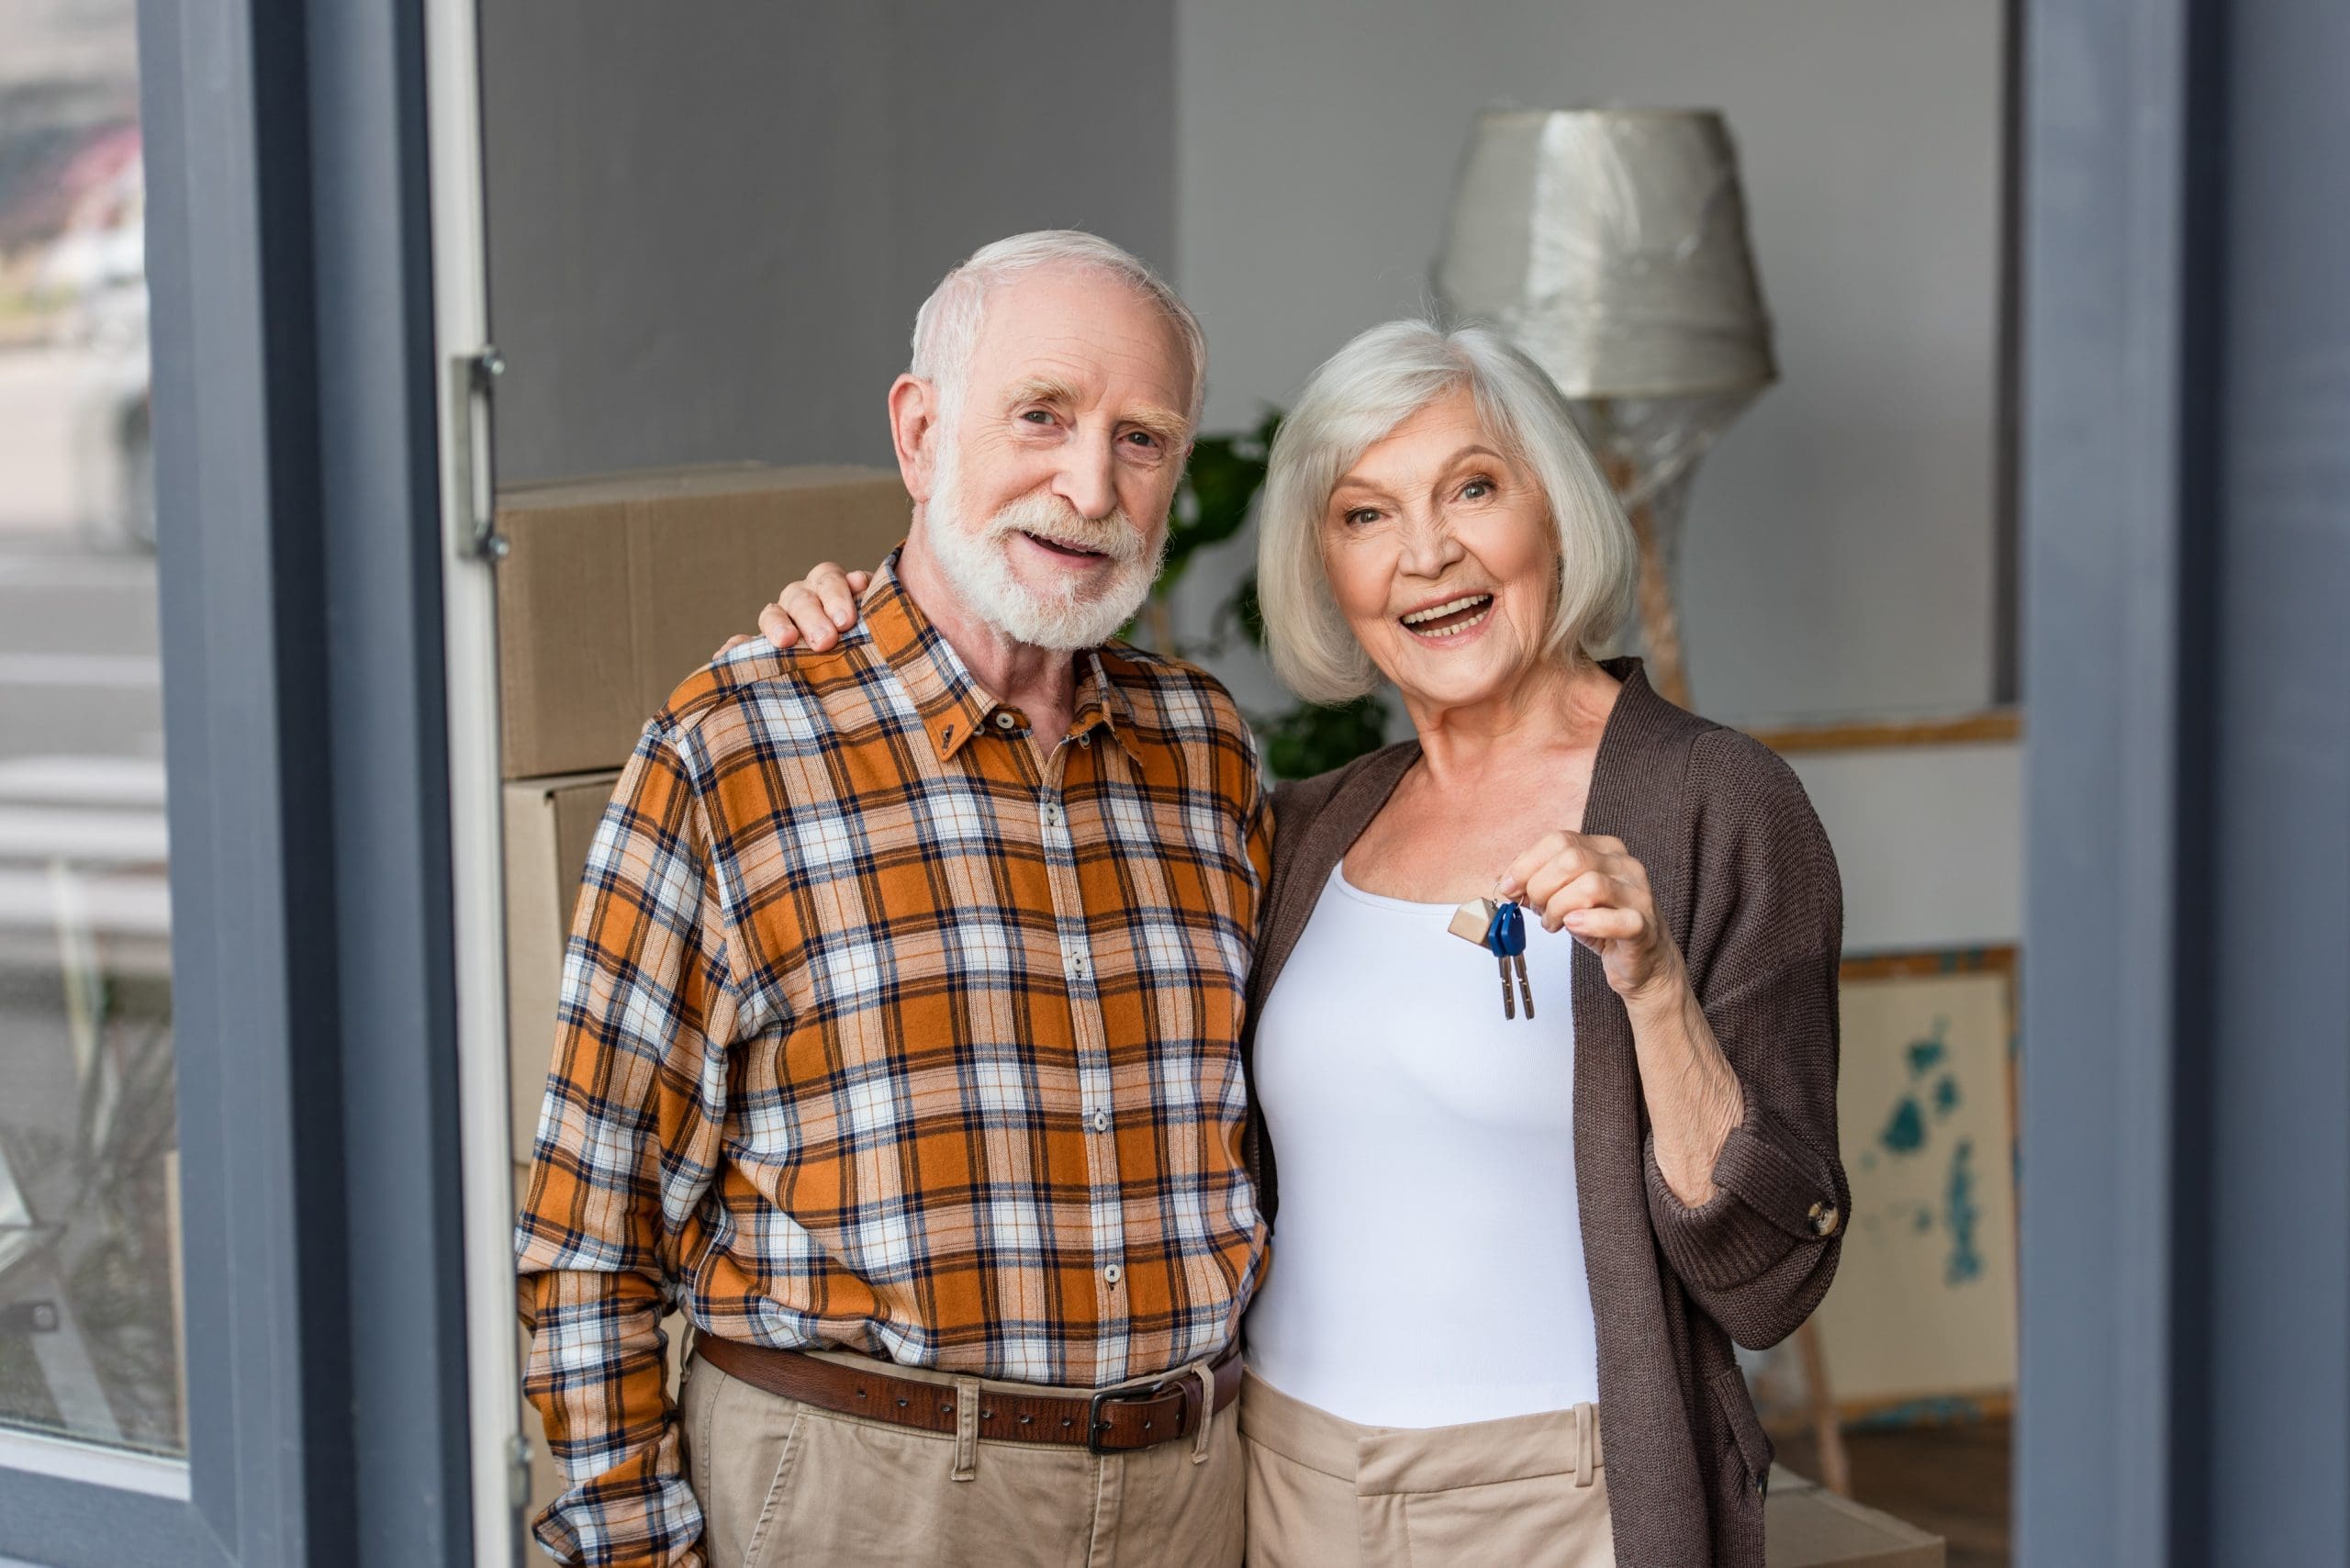 laughing senior woman holding keys and embracing husband in new house